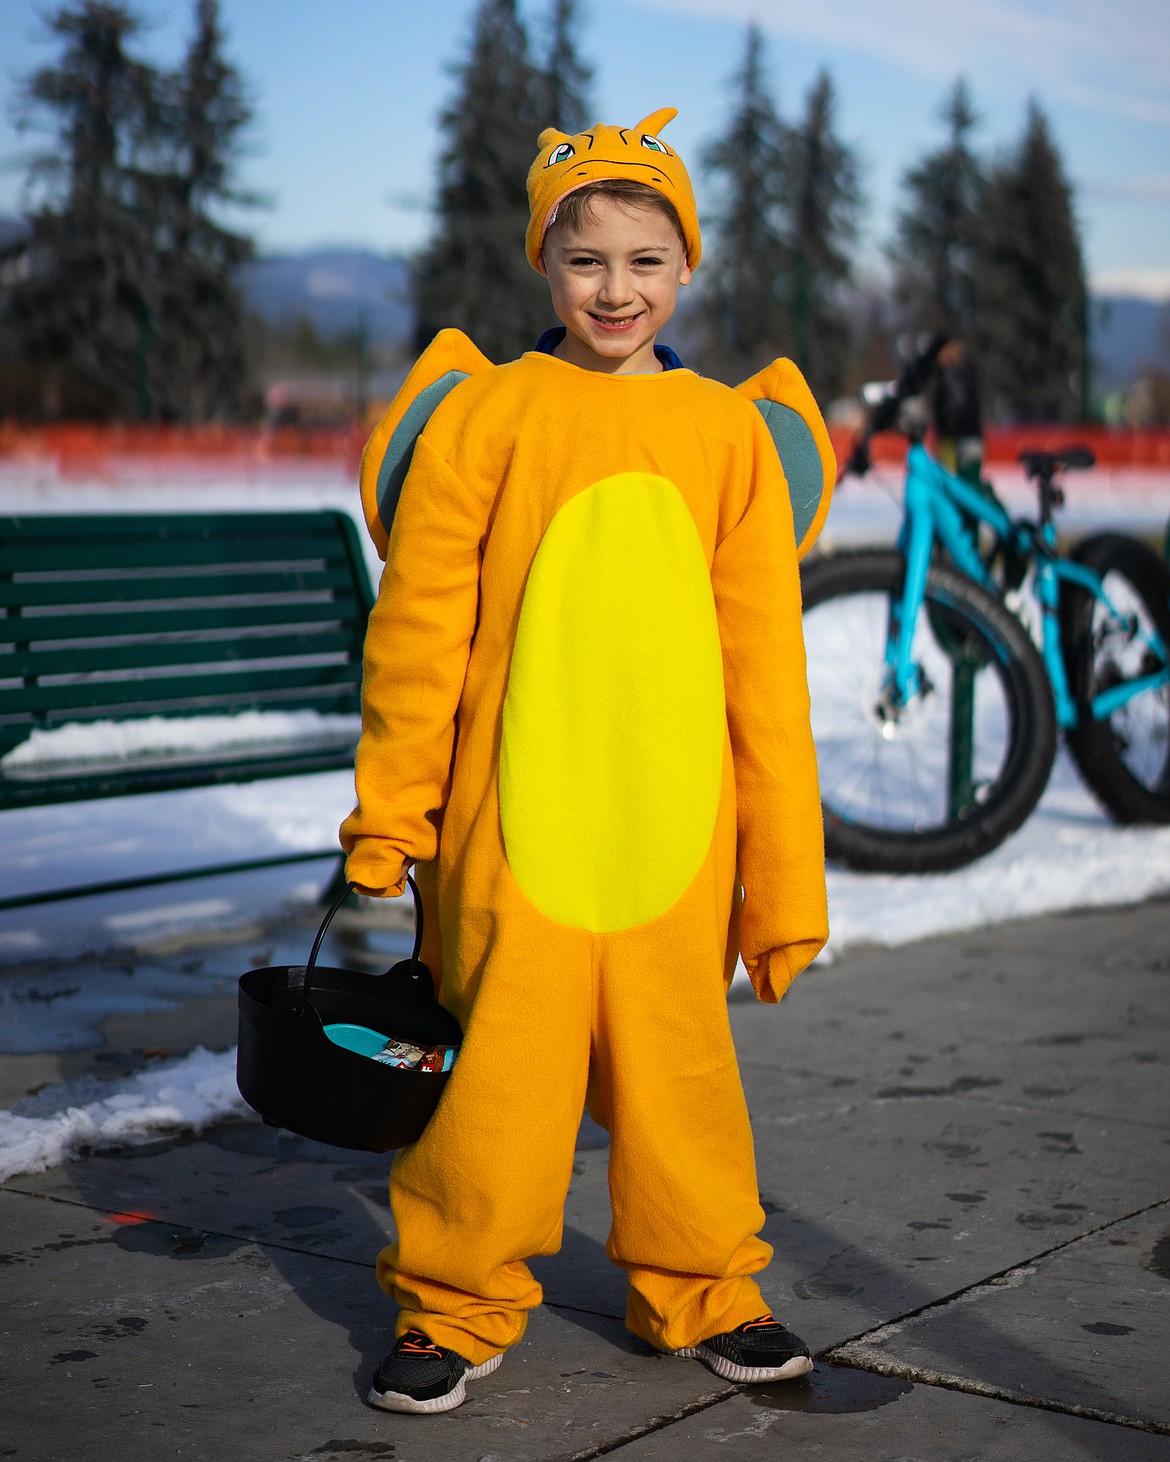 Charizard prepares to battle for candy during the Whitefish Trick or Treat downtown on Thursday. (Daniel McKay/Whitefish Pilot)